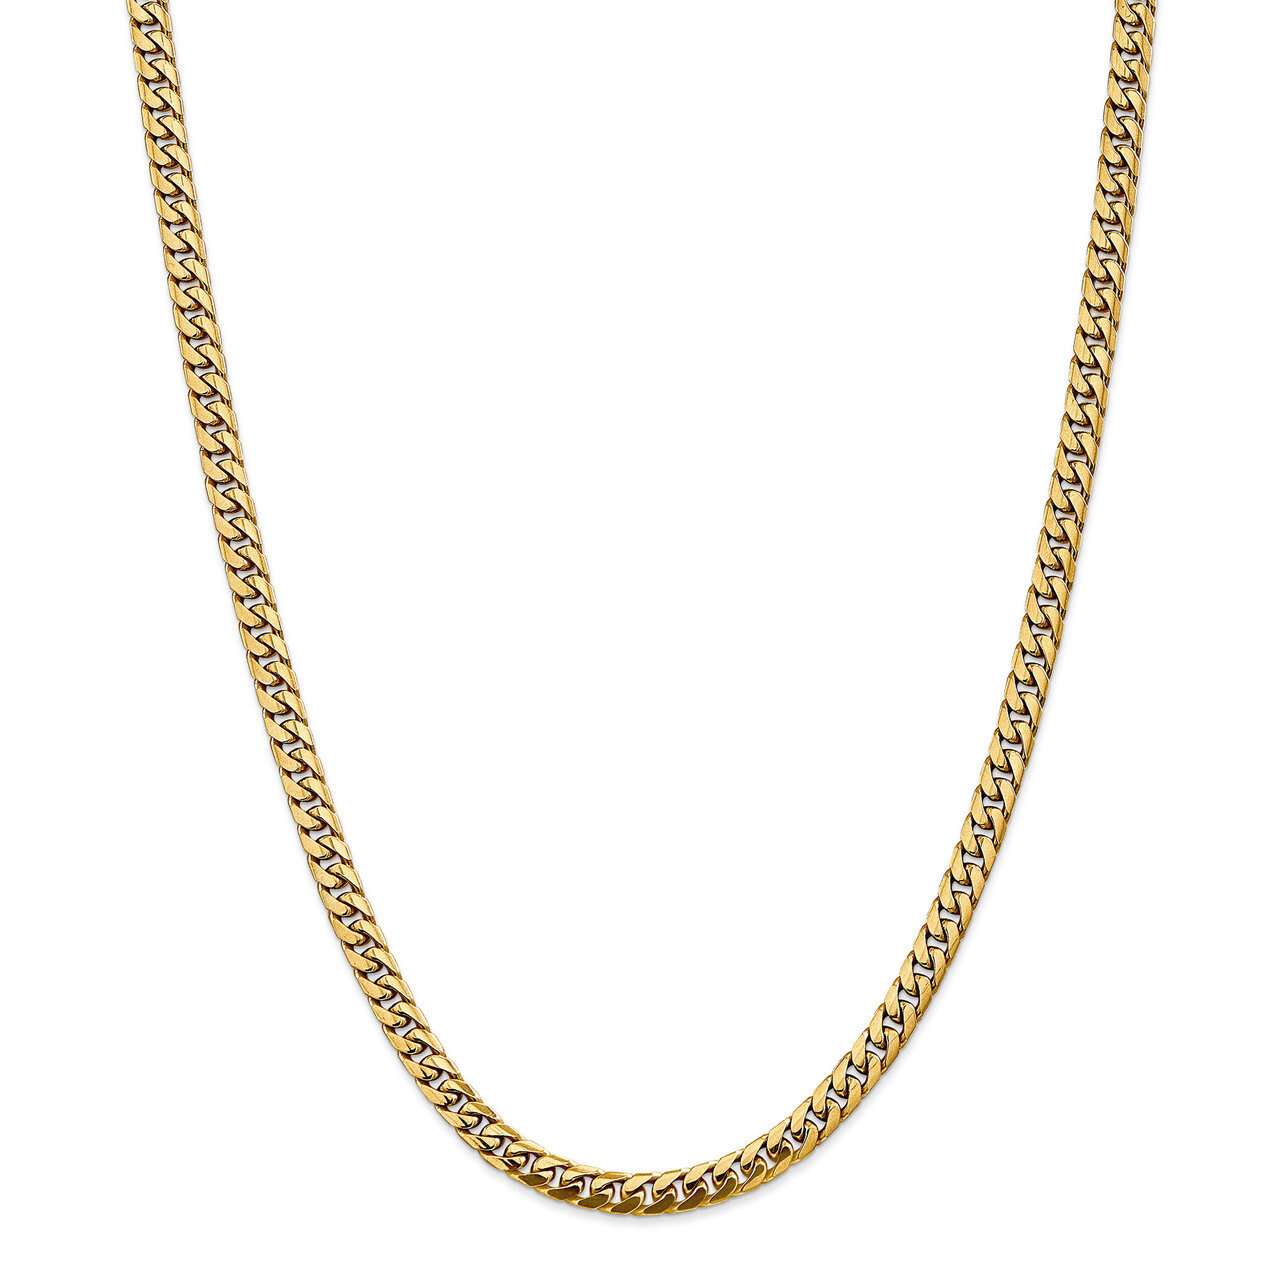 26 Inch 5mm Domed Curb Chain 14k Gold DCU160-26